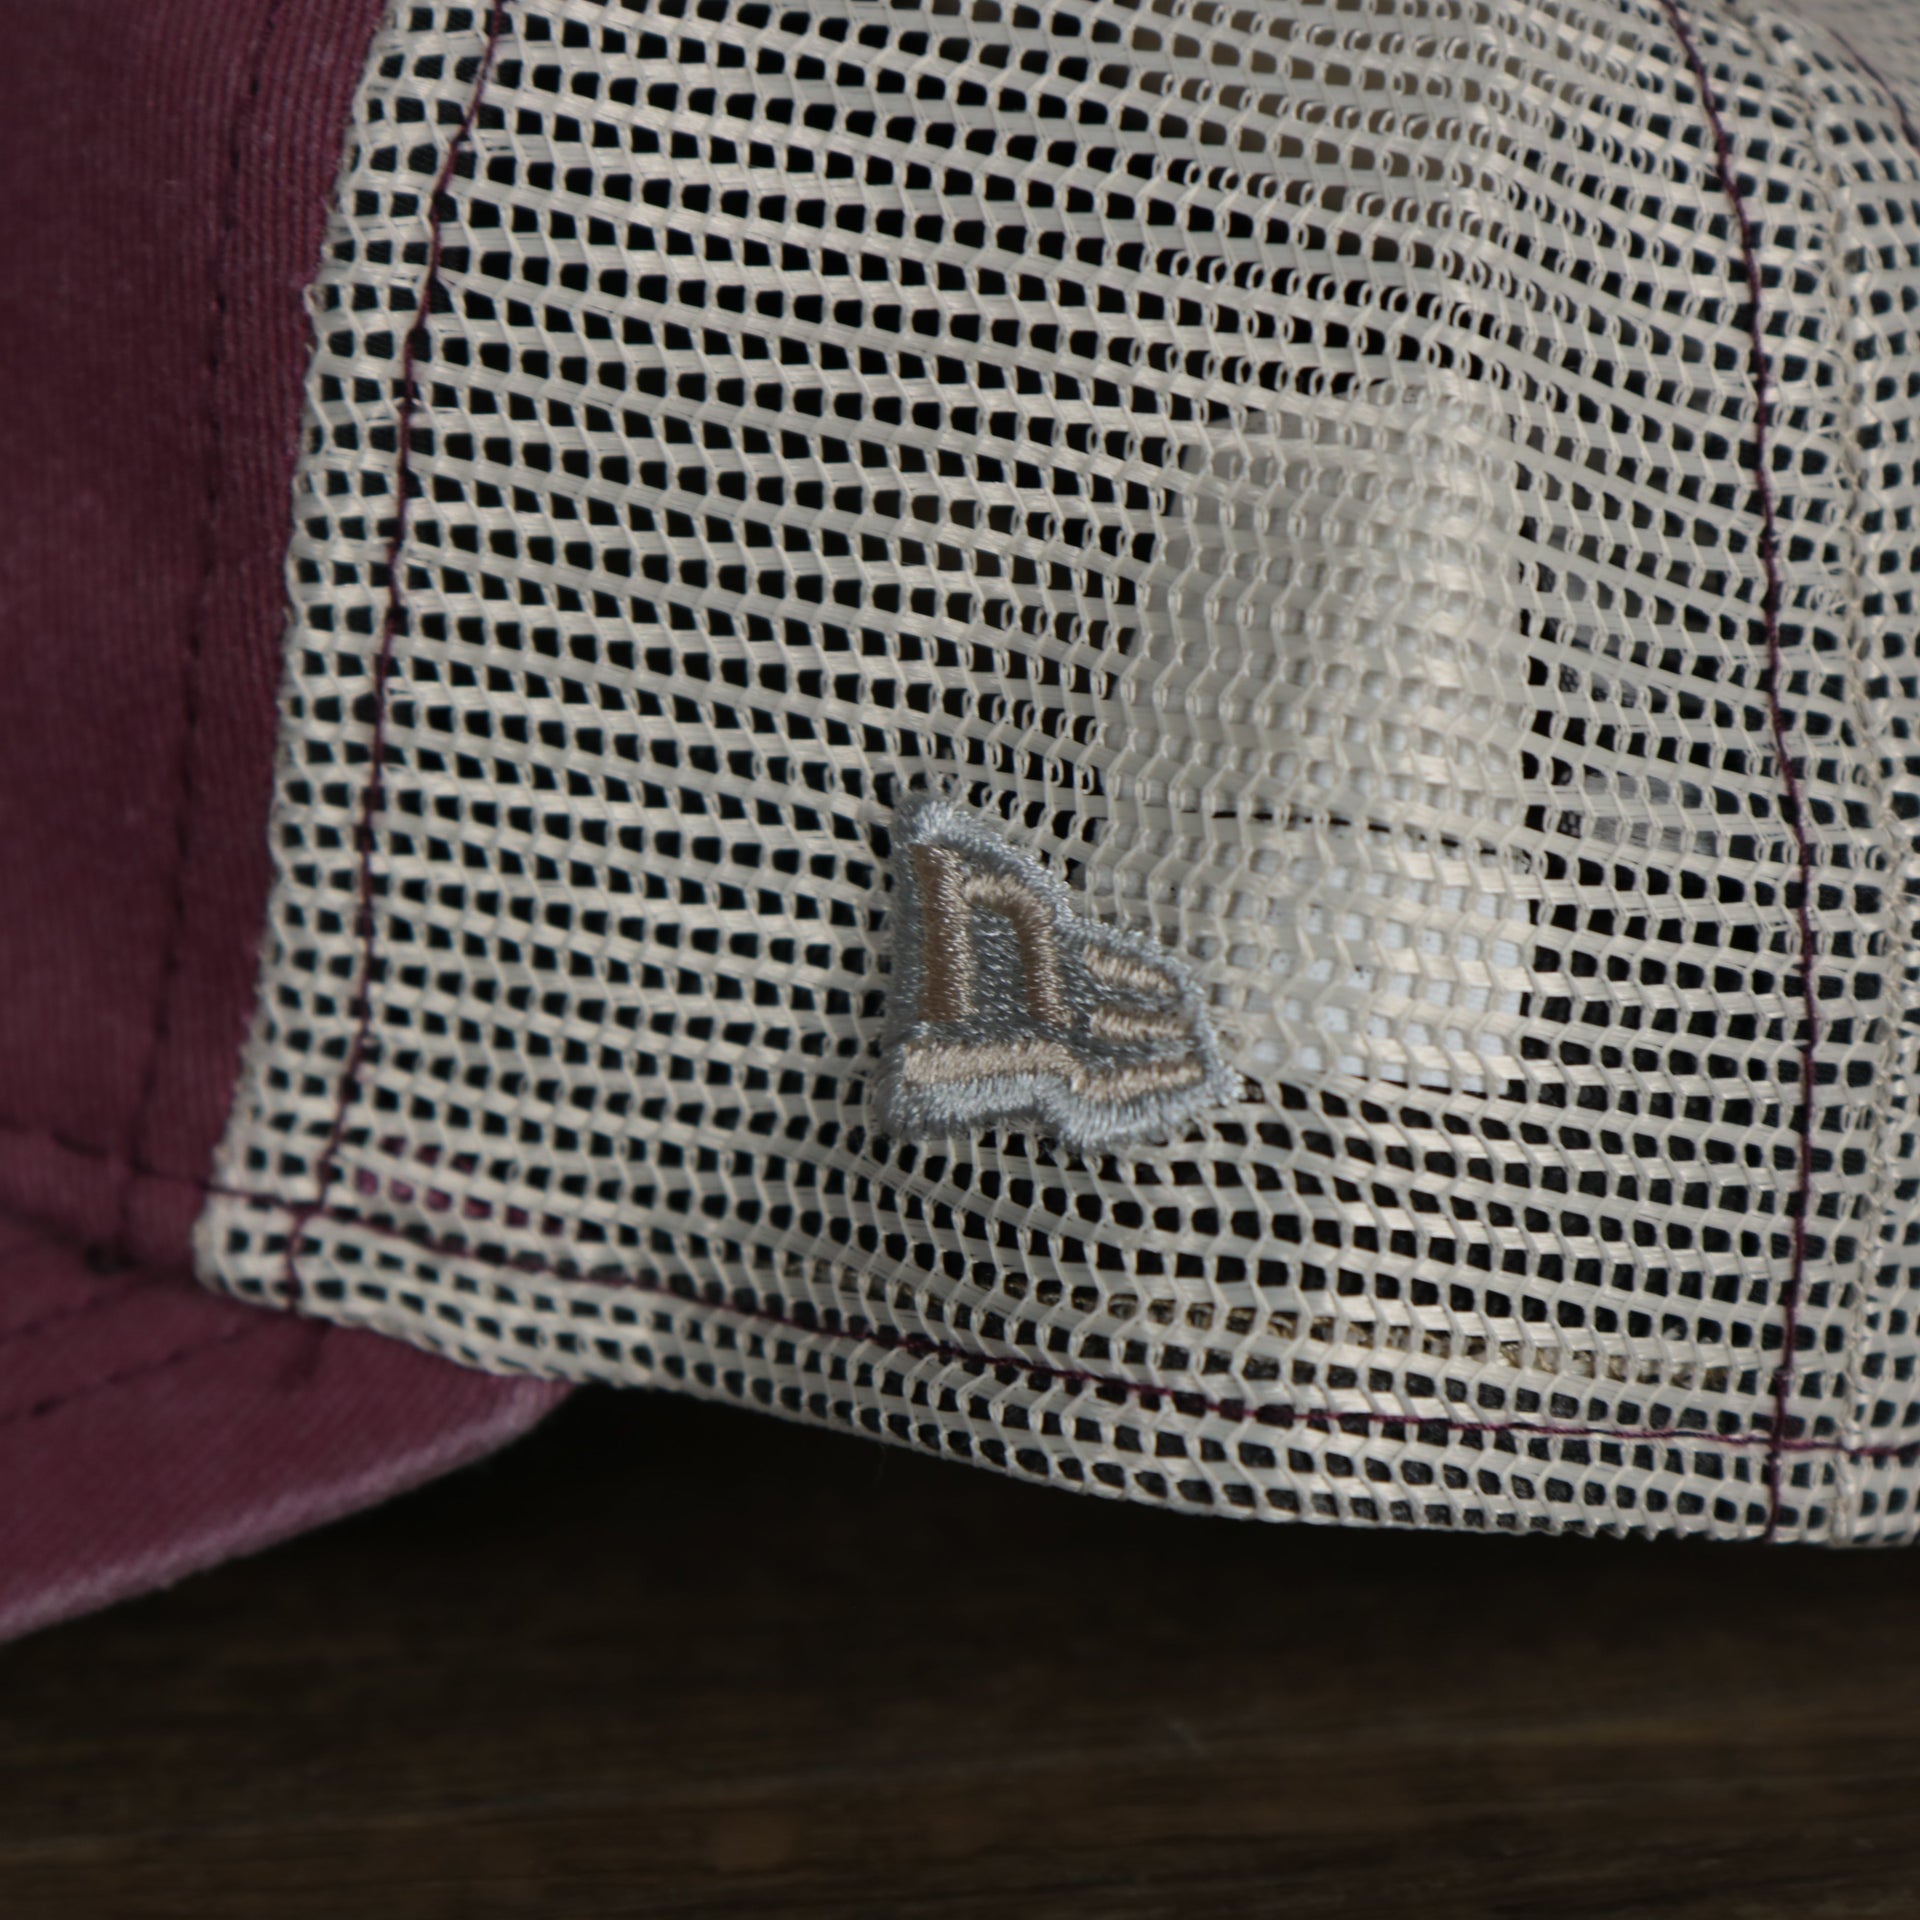 A close up of the New Era logo on the Philadelphia Phillies Cooperstown New Era 9Twenty Washed Trucker Youth hat